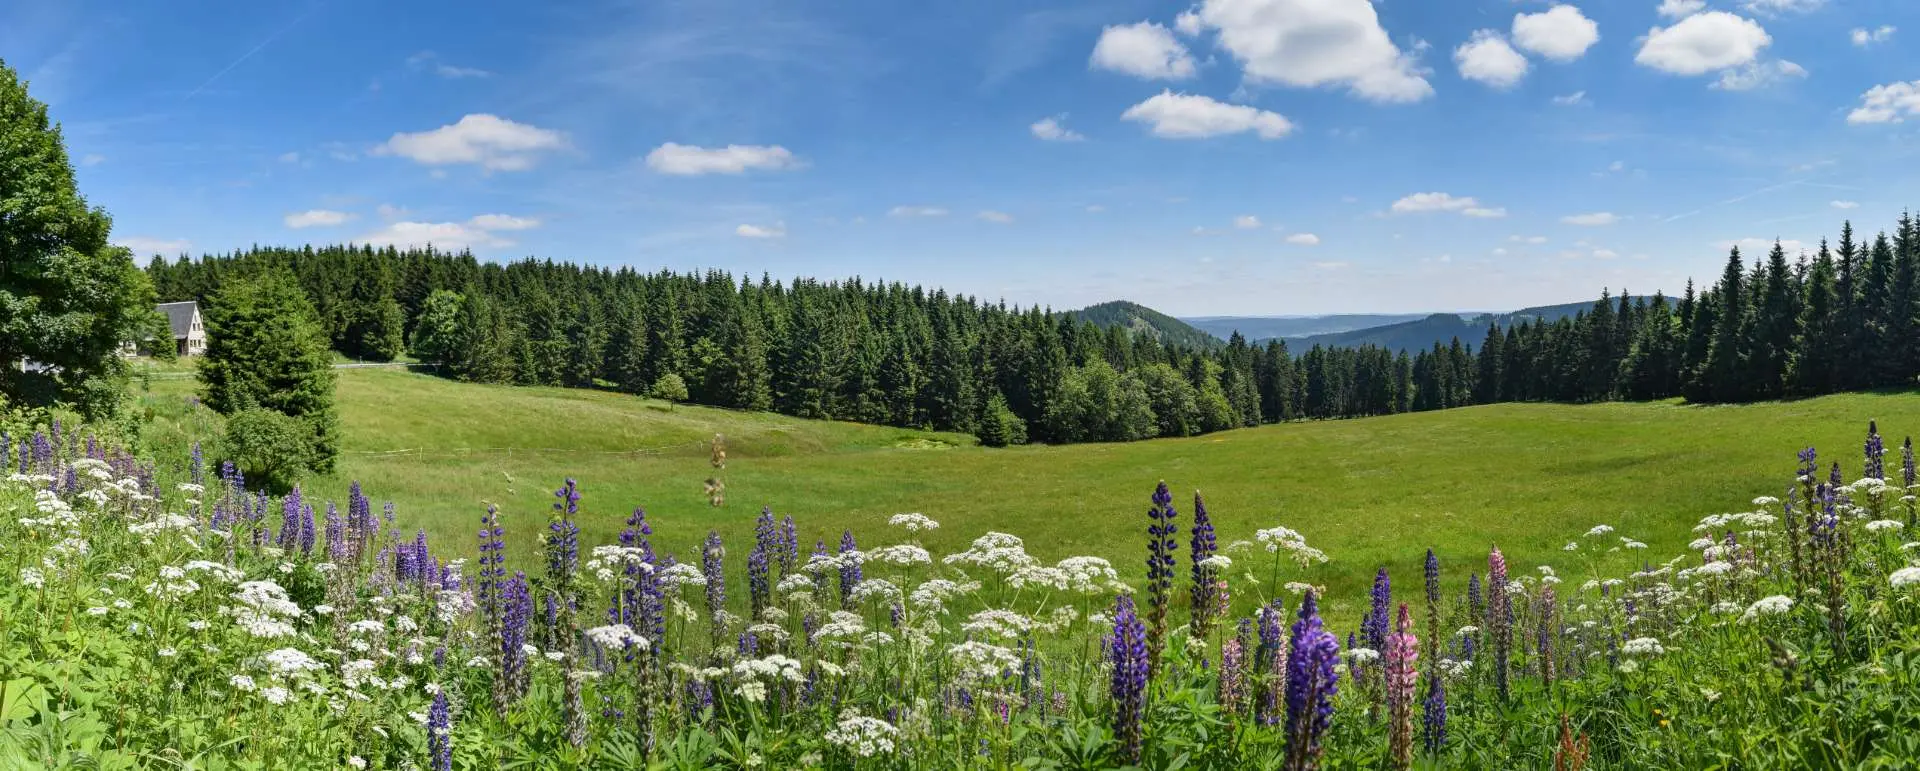 Thuringian Forest - the destination for group hotel with group room